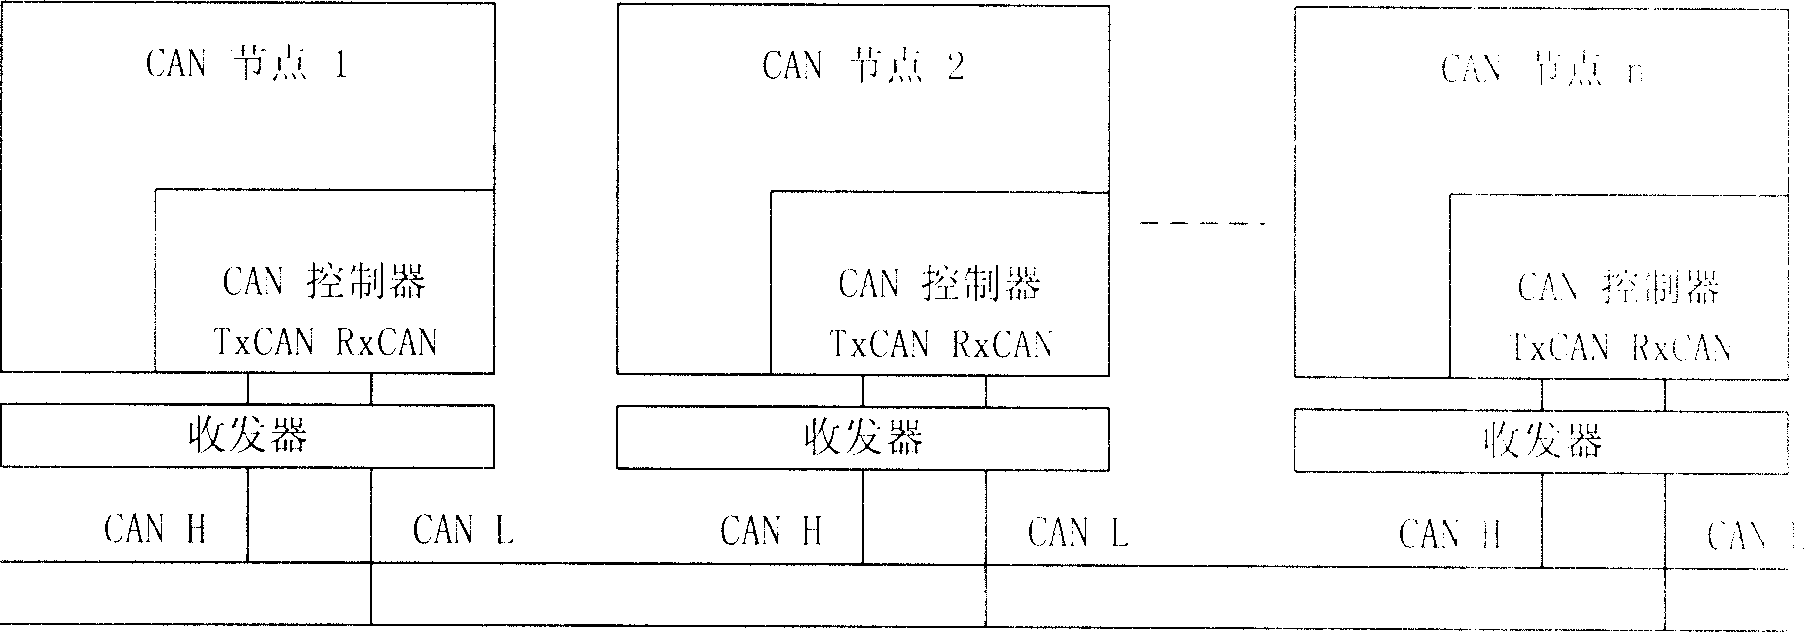 Method and apparatus for controlling controlled equipment in motor vehicle